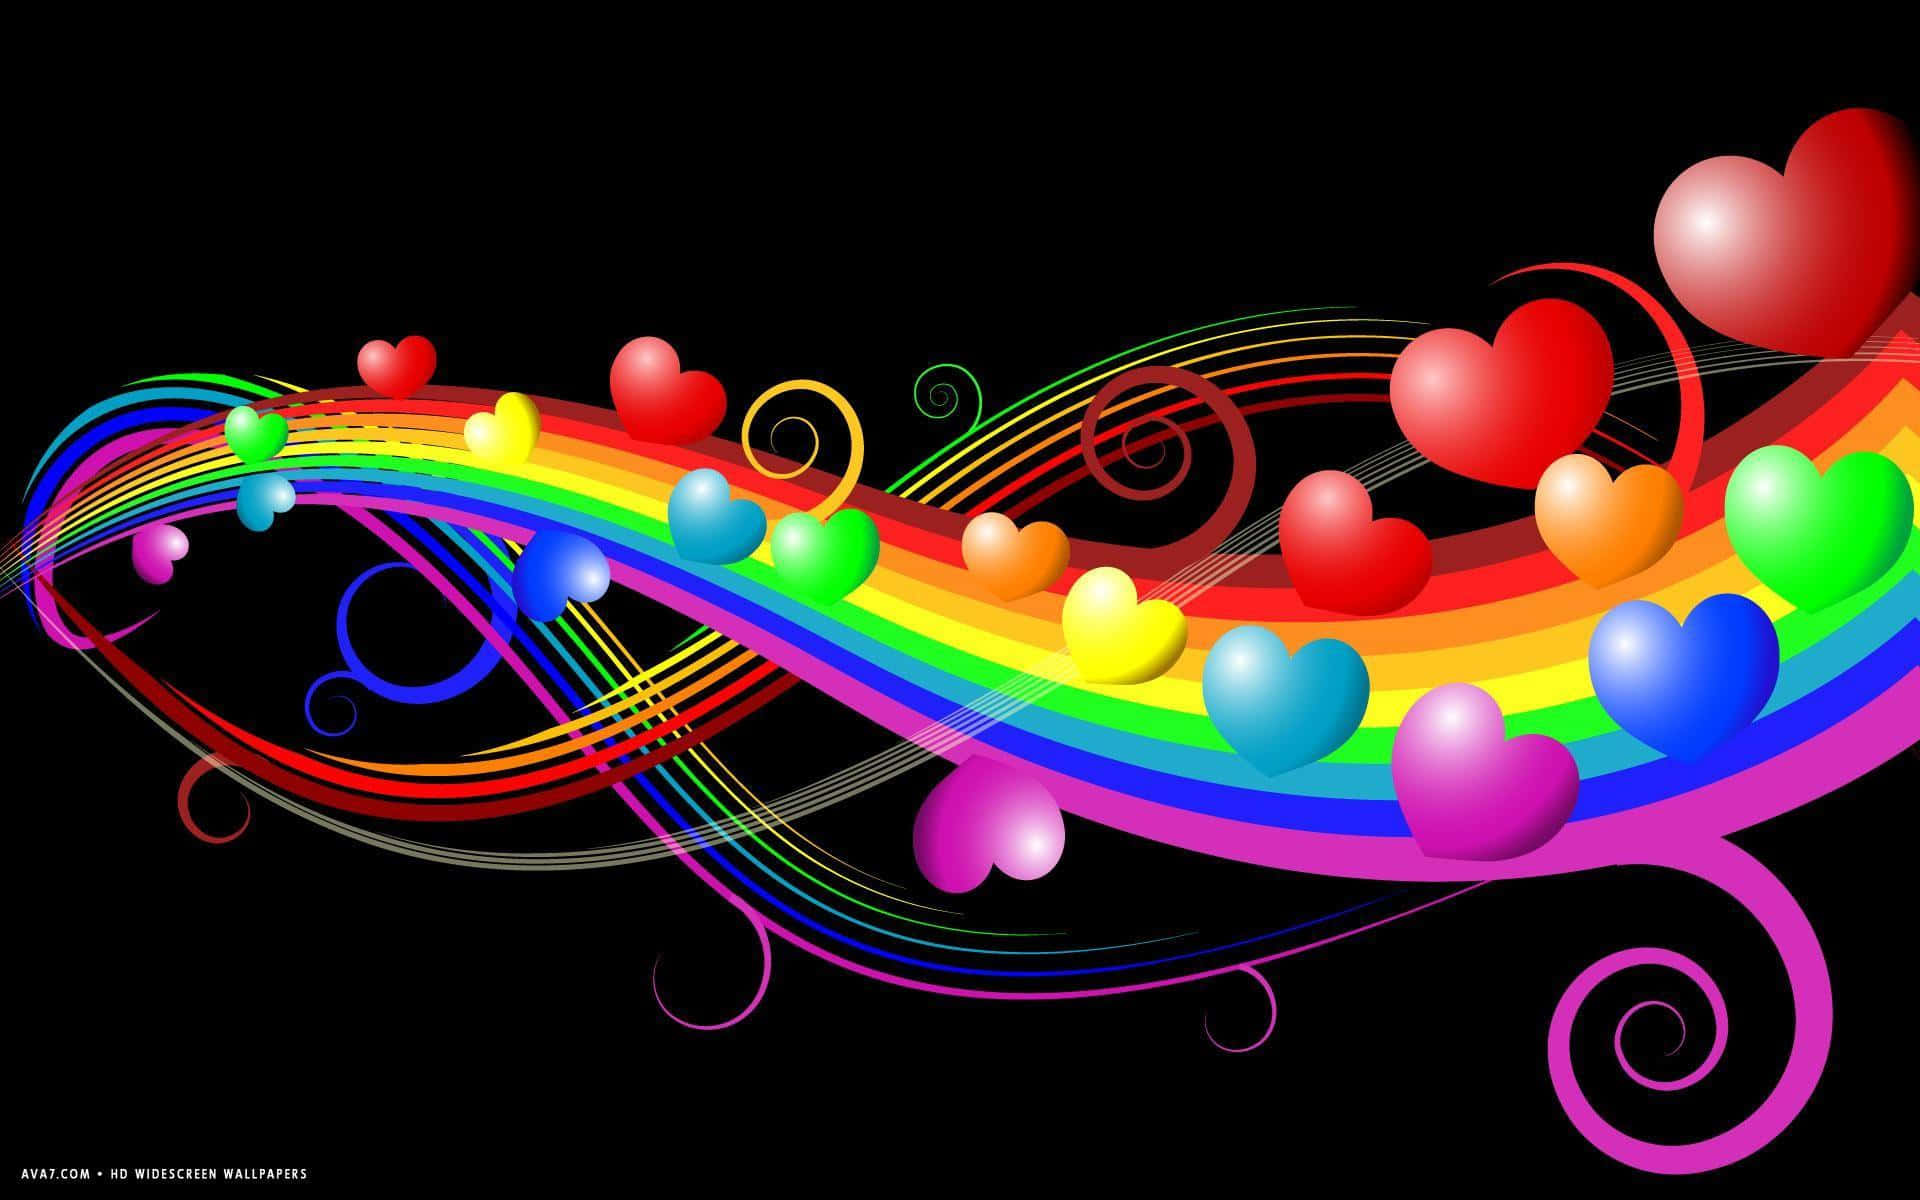 Showing Love And Kindness In All Colors Wallpaper